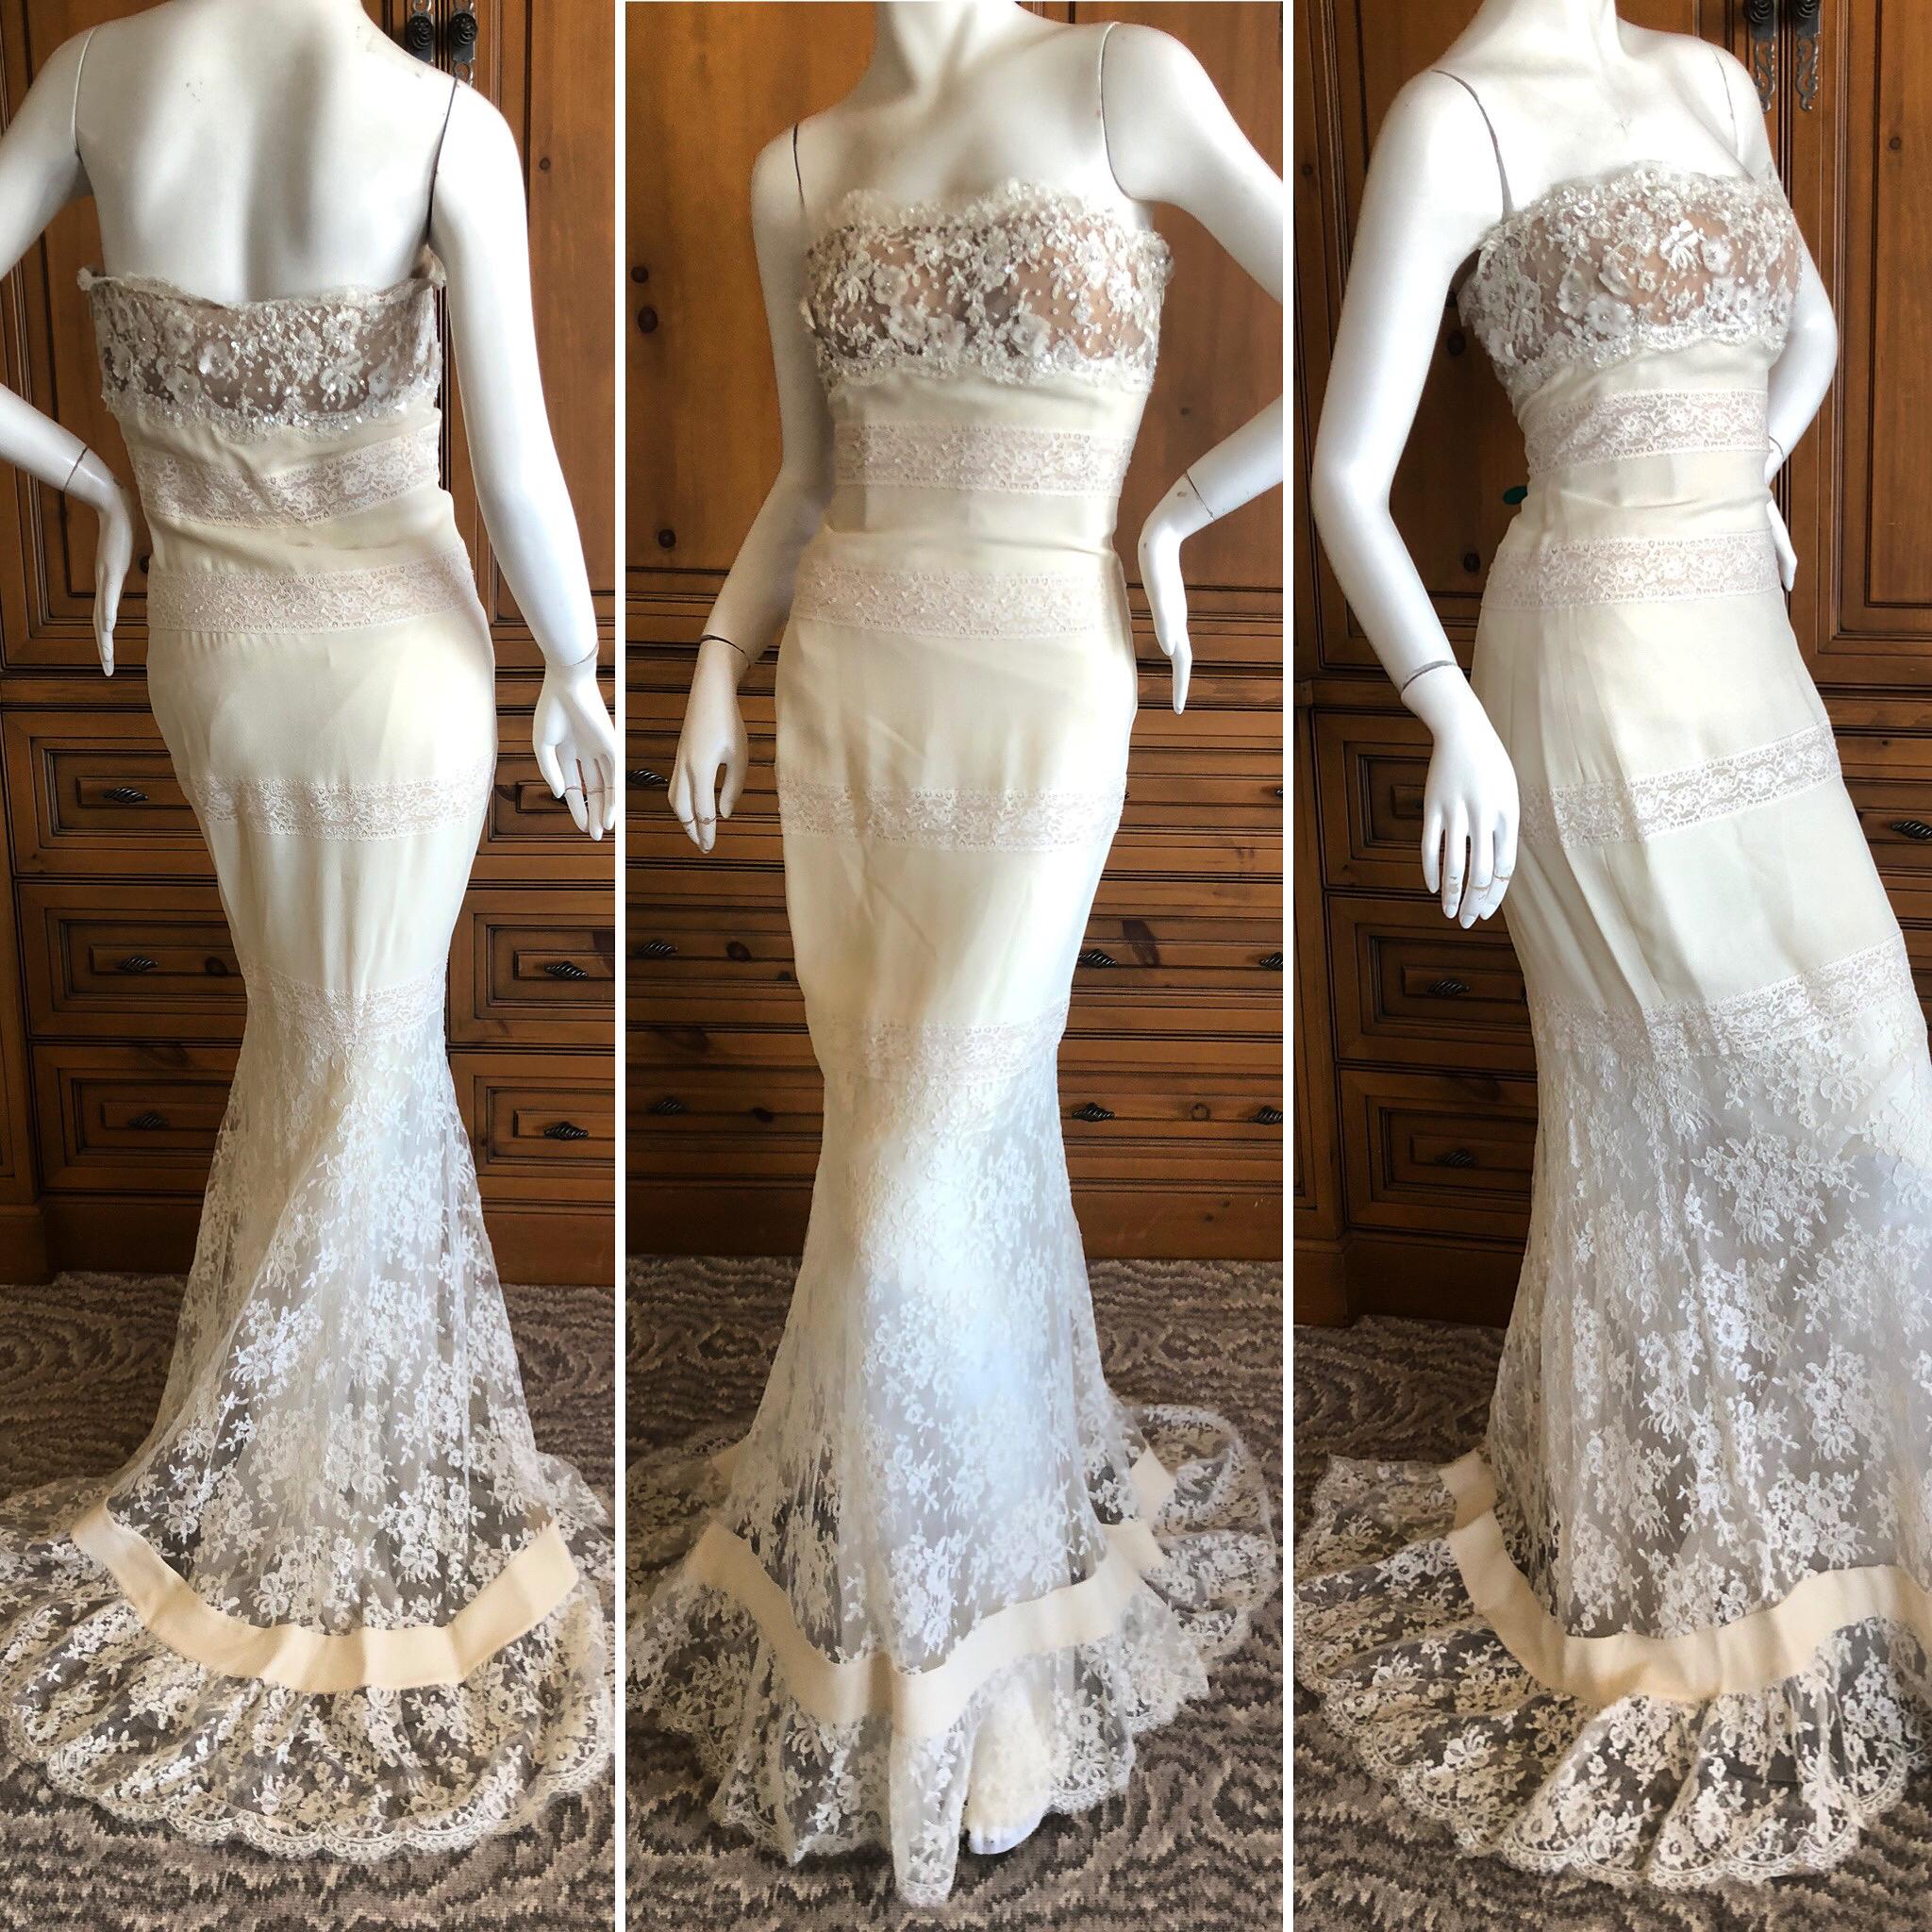 Valentino Vintage Lace Wedding or Evening Dress with Train.
So pretty . Much prettier in person, this was hard to capture in a photo.
There is an inner corset.
Size 6 
Bust  34